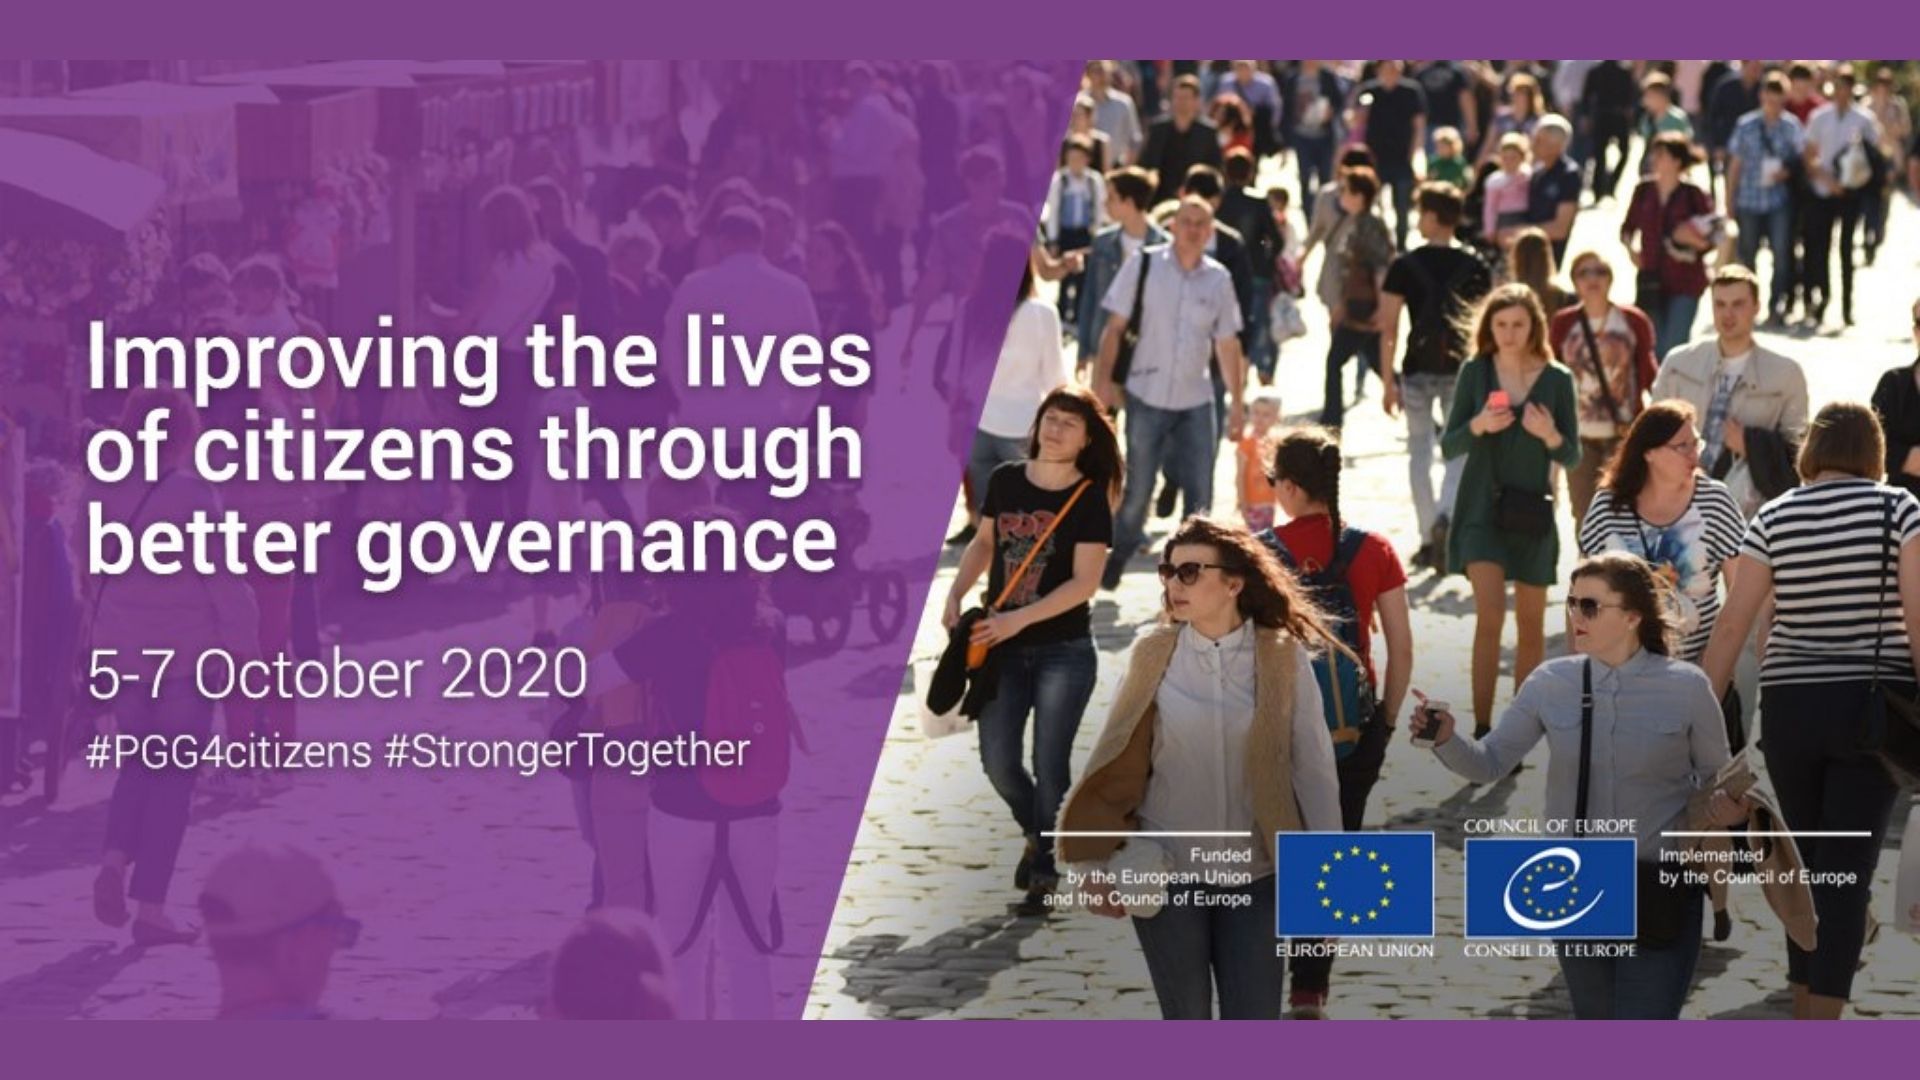 5-7 October: high-level online event on midterm results of the EU/CoE Partnership for Good Governance for Eastern Partnership countries